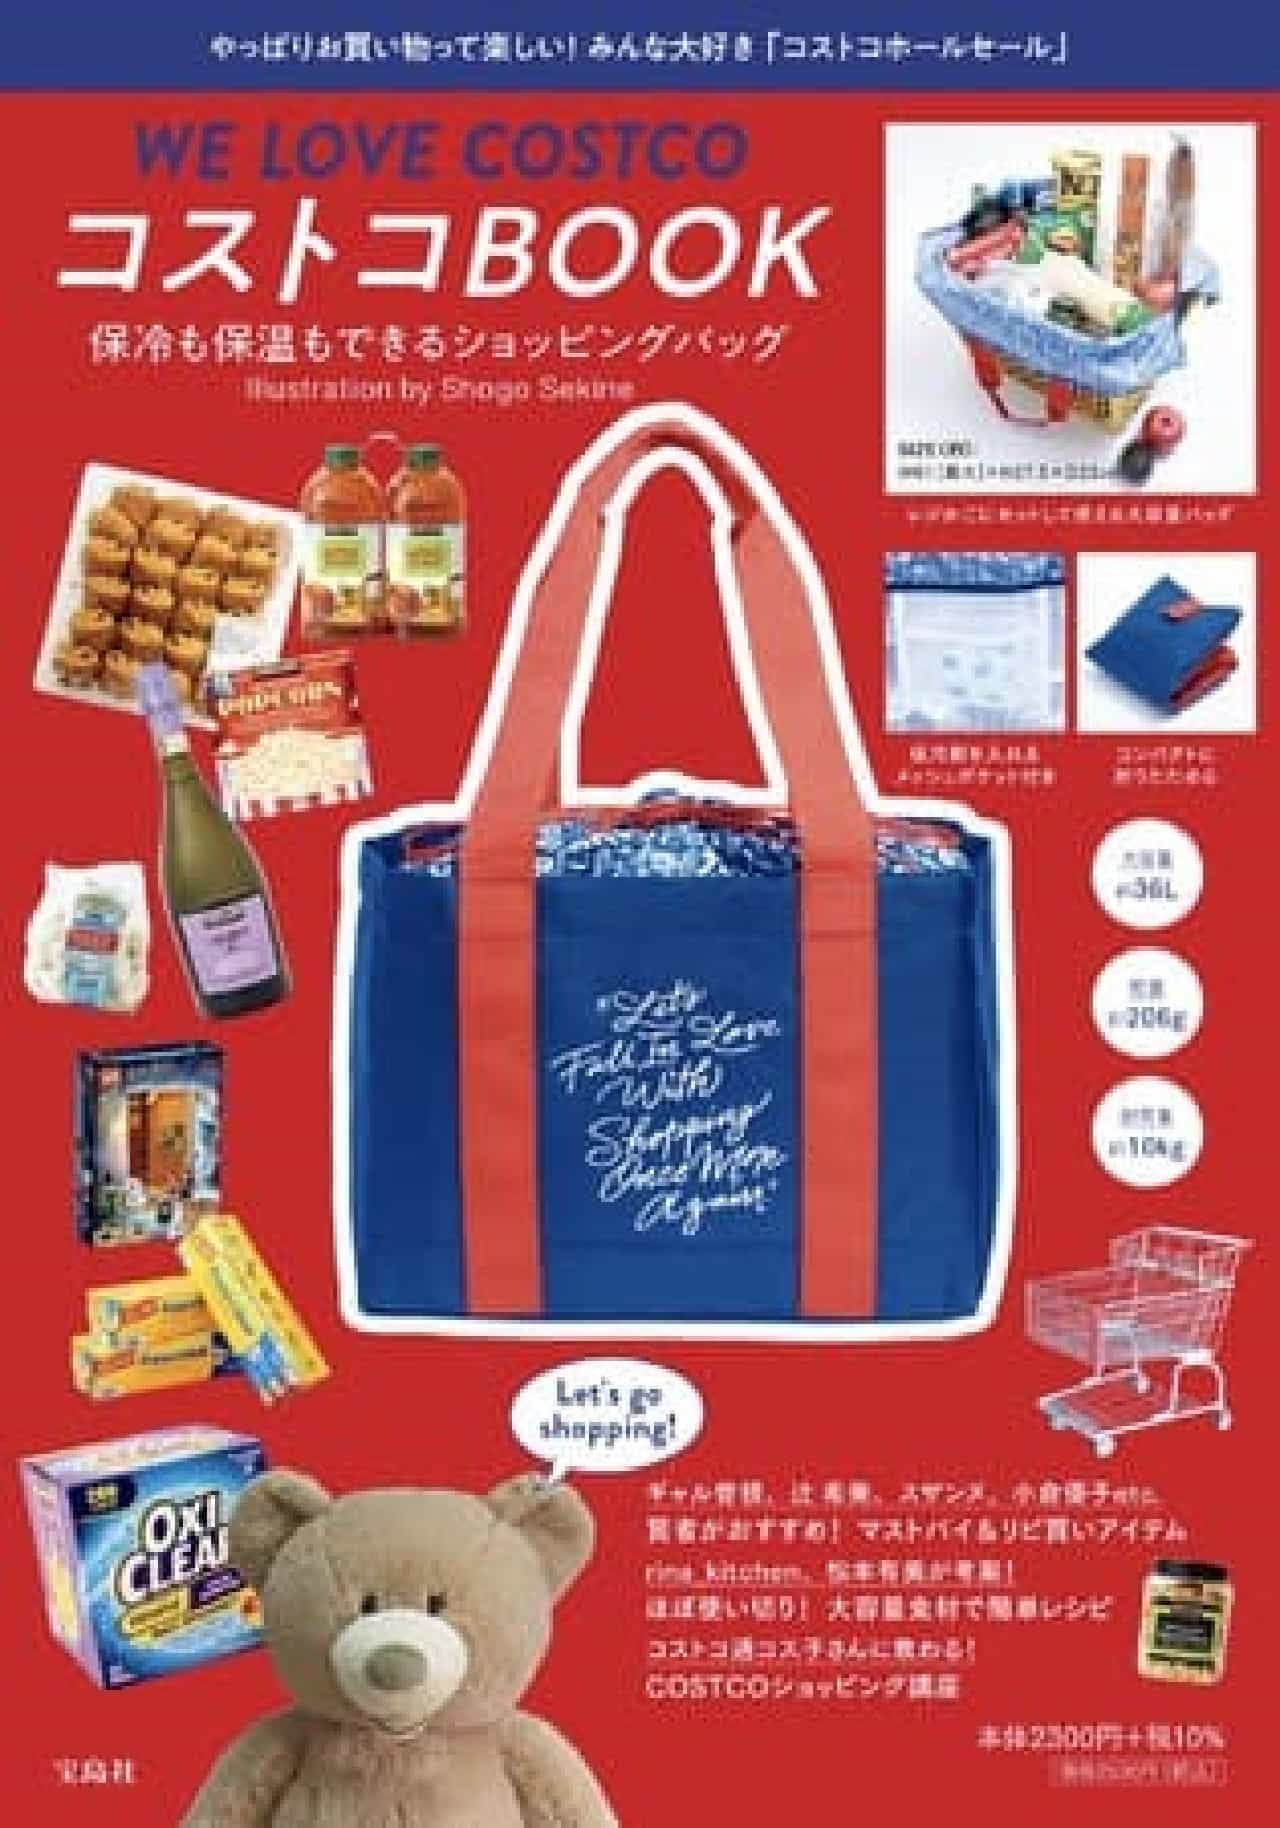 "Costco BOOK Shopping bag that can keep cold and warm" Costco Wholesale Special! Appendix design by Shogo Sekine